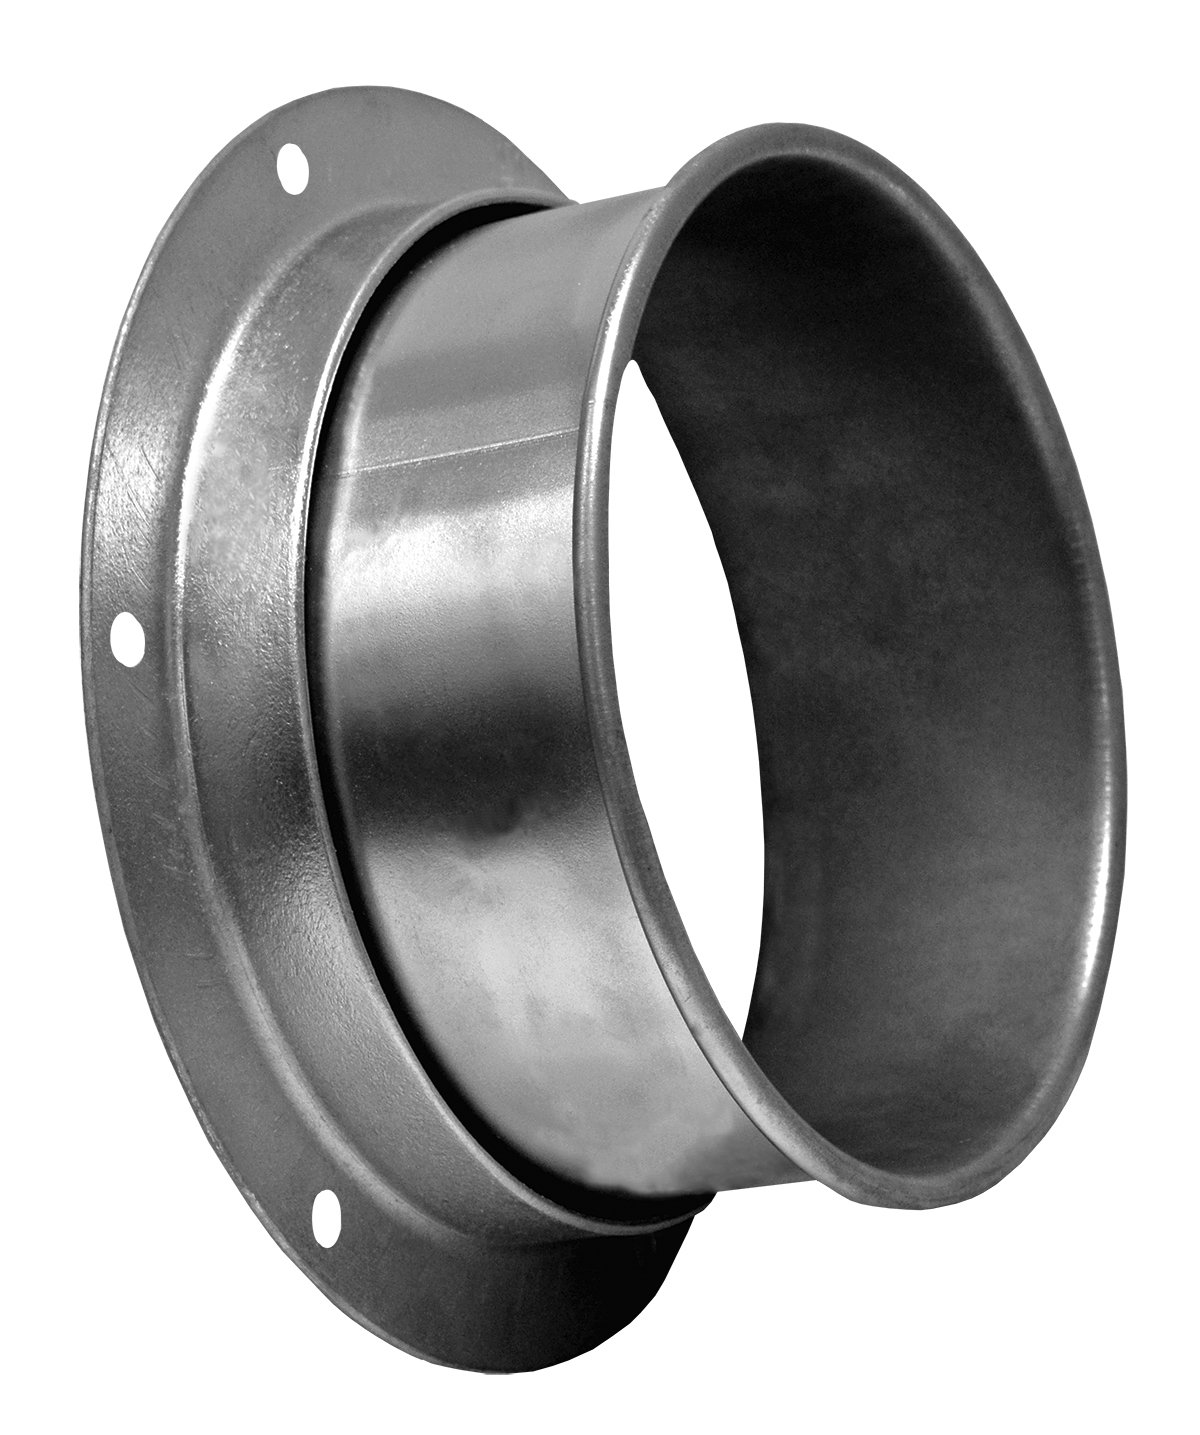 NORDFAB 3250-1000-100000 Angle Flange Adapter,10" Duct Size 